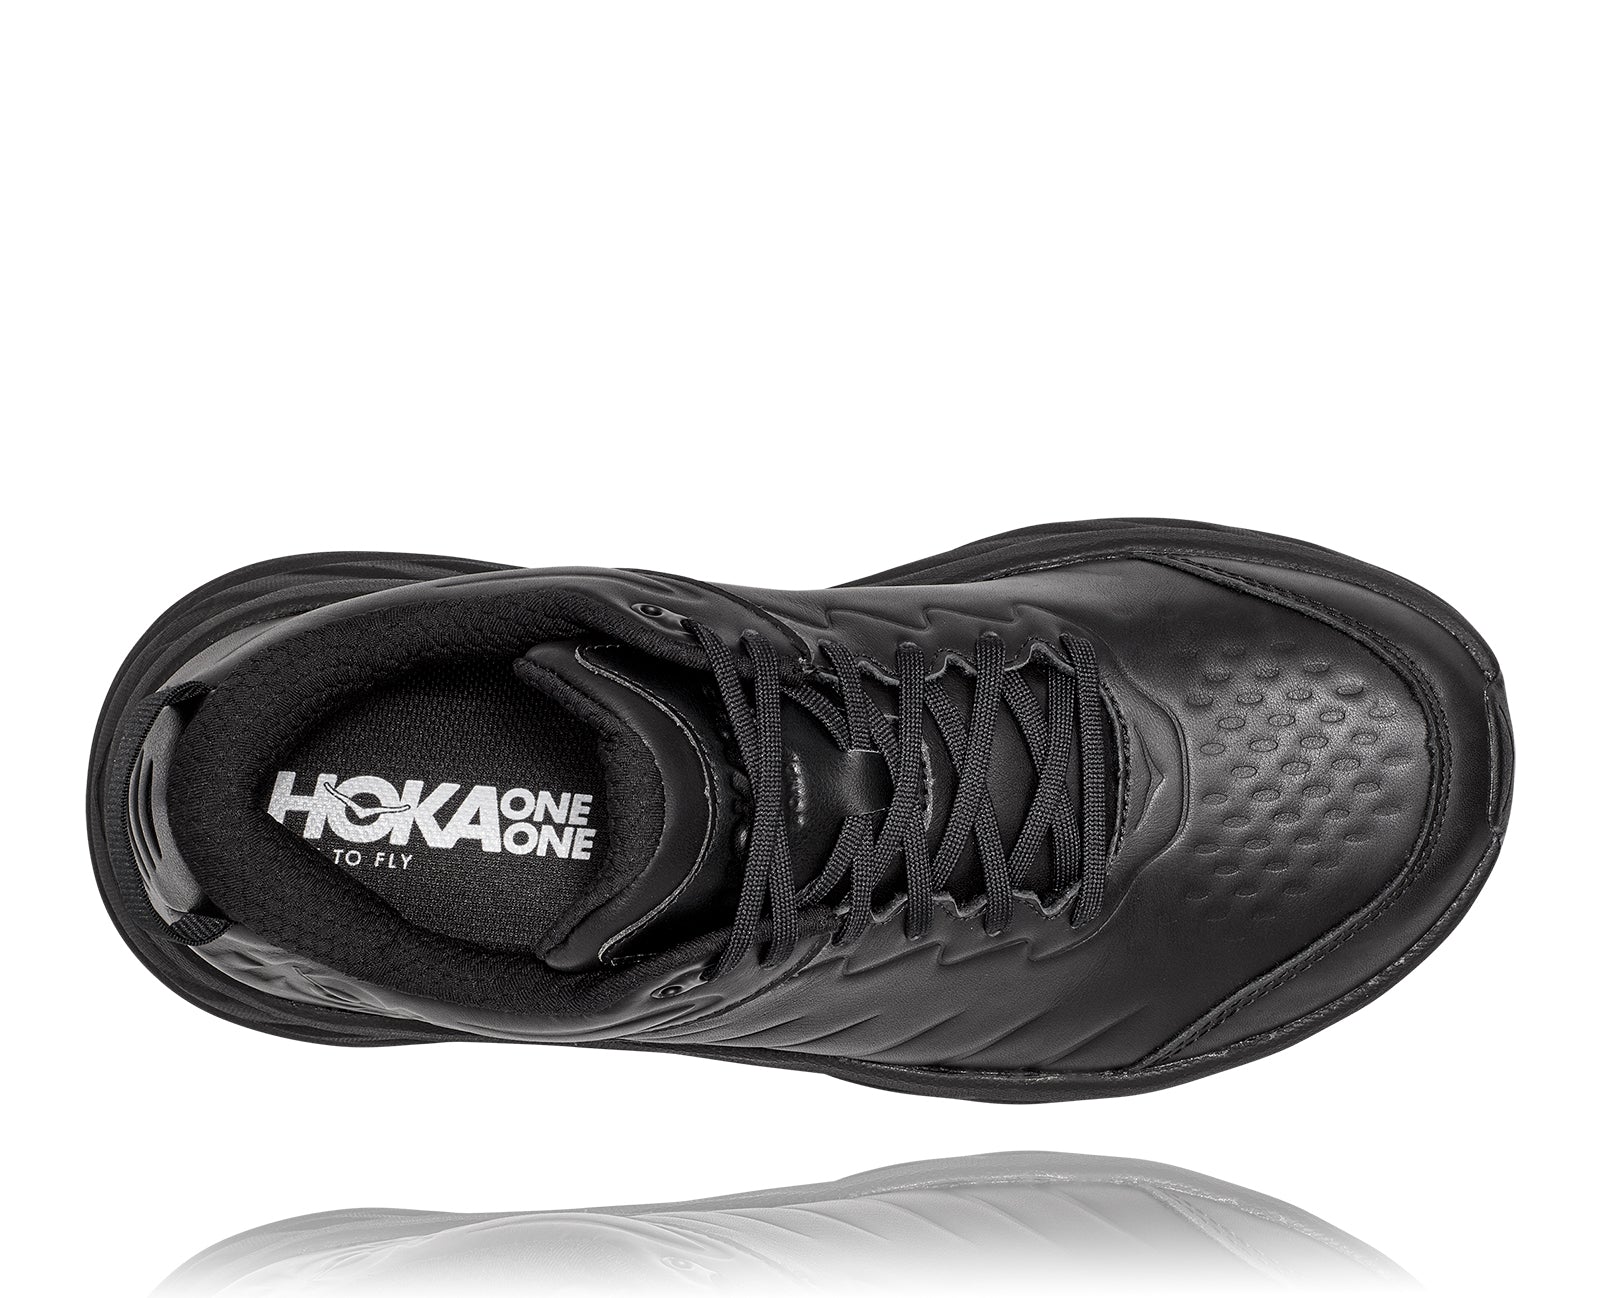 All the features of the Men's Hoka Bondi SR are designed to keep you comfortable all day long.